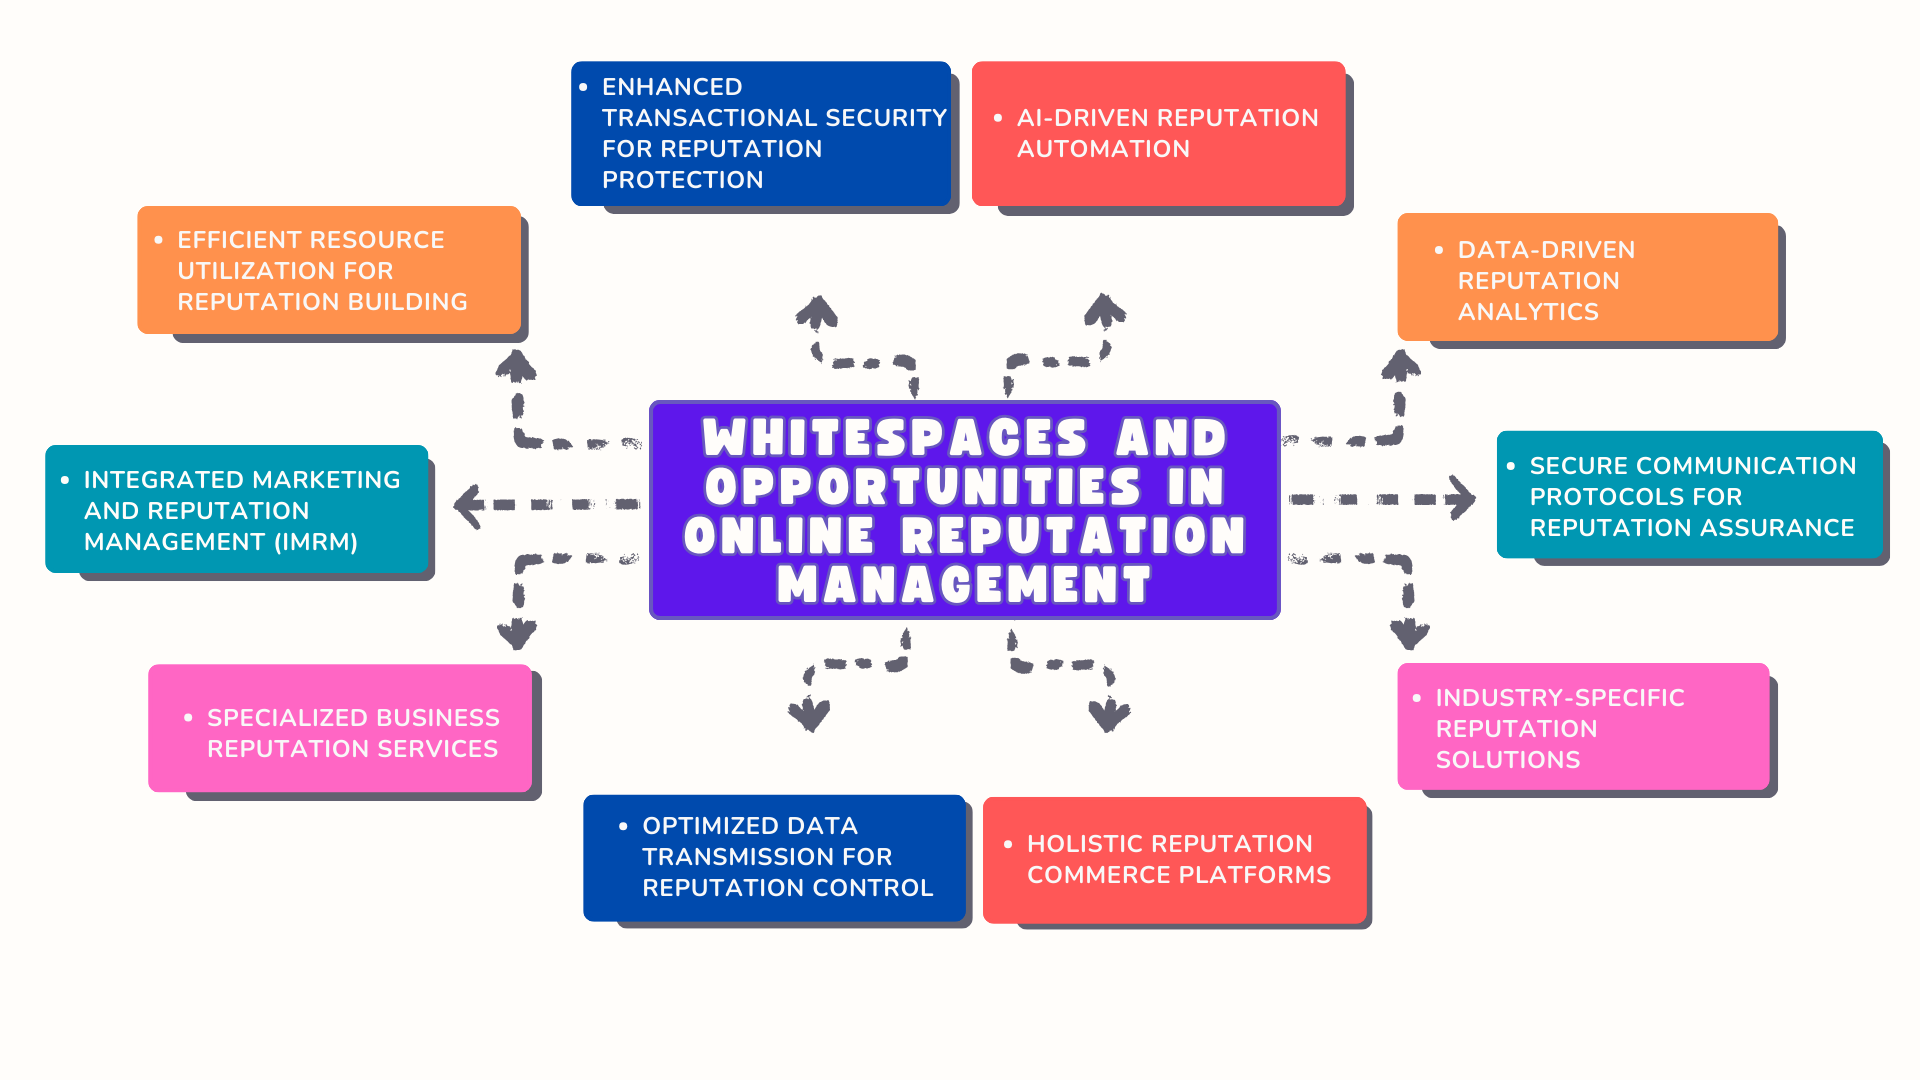 Whitespaces and Opportunities in Online Reputation Management